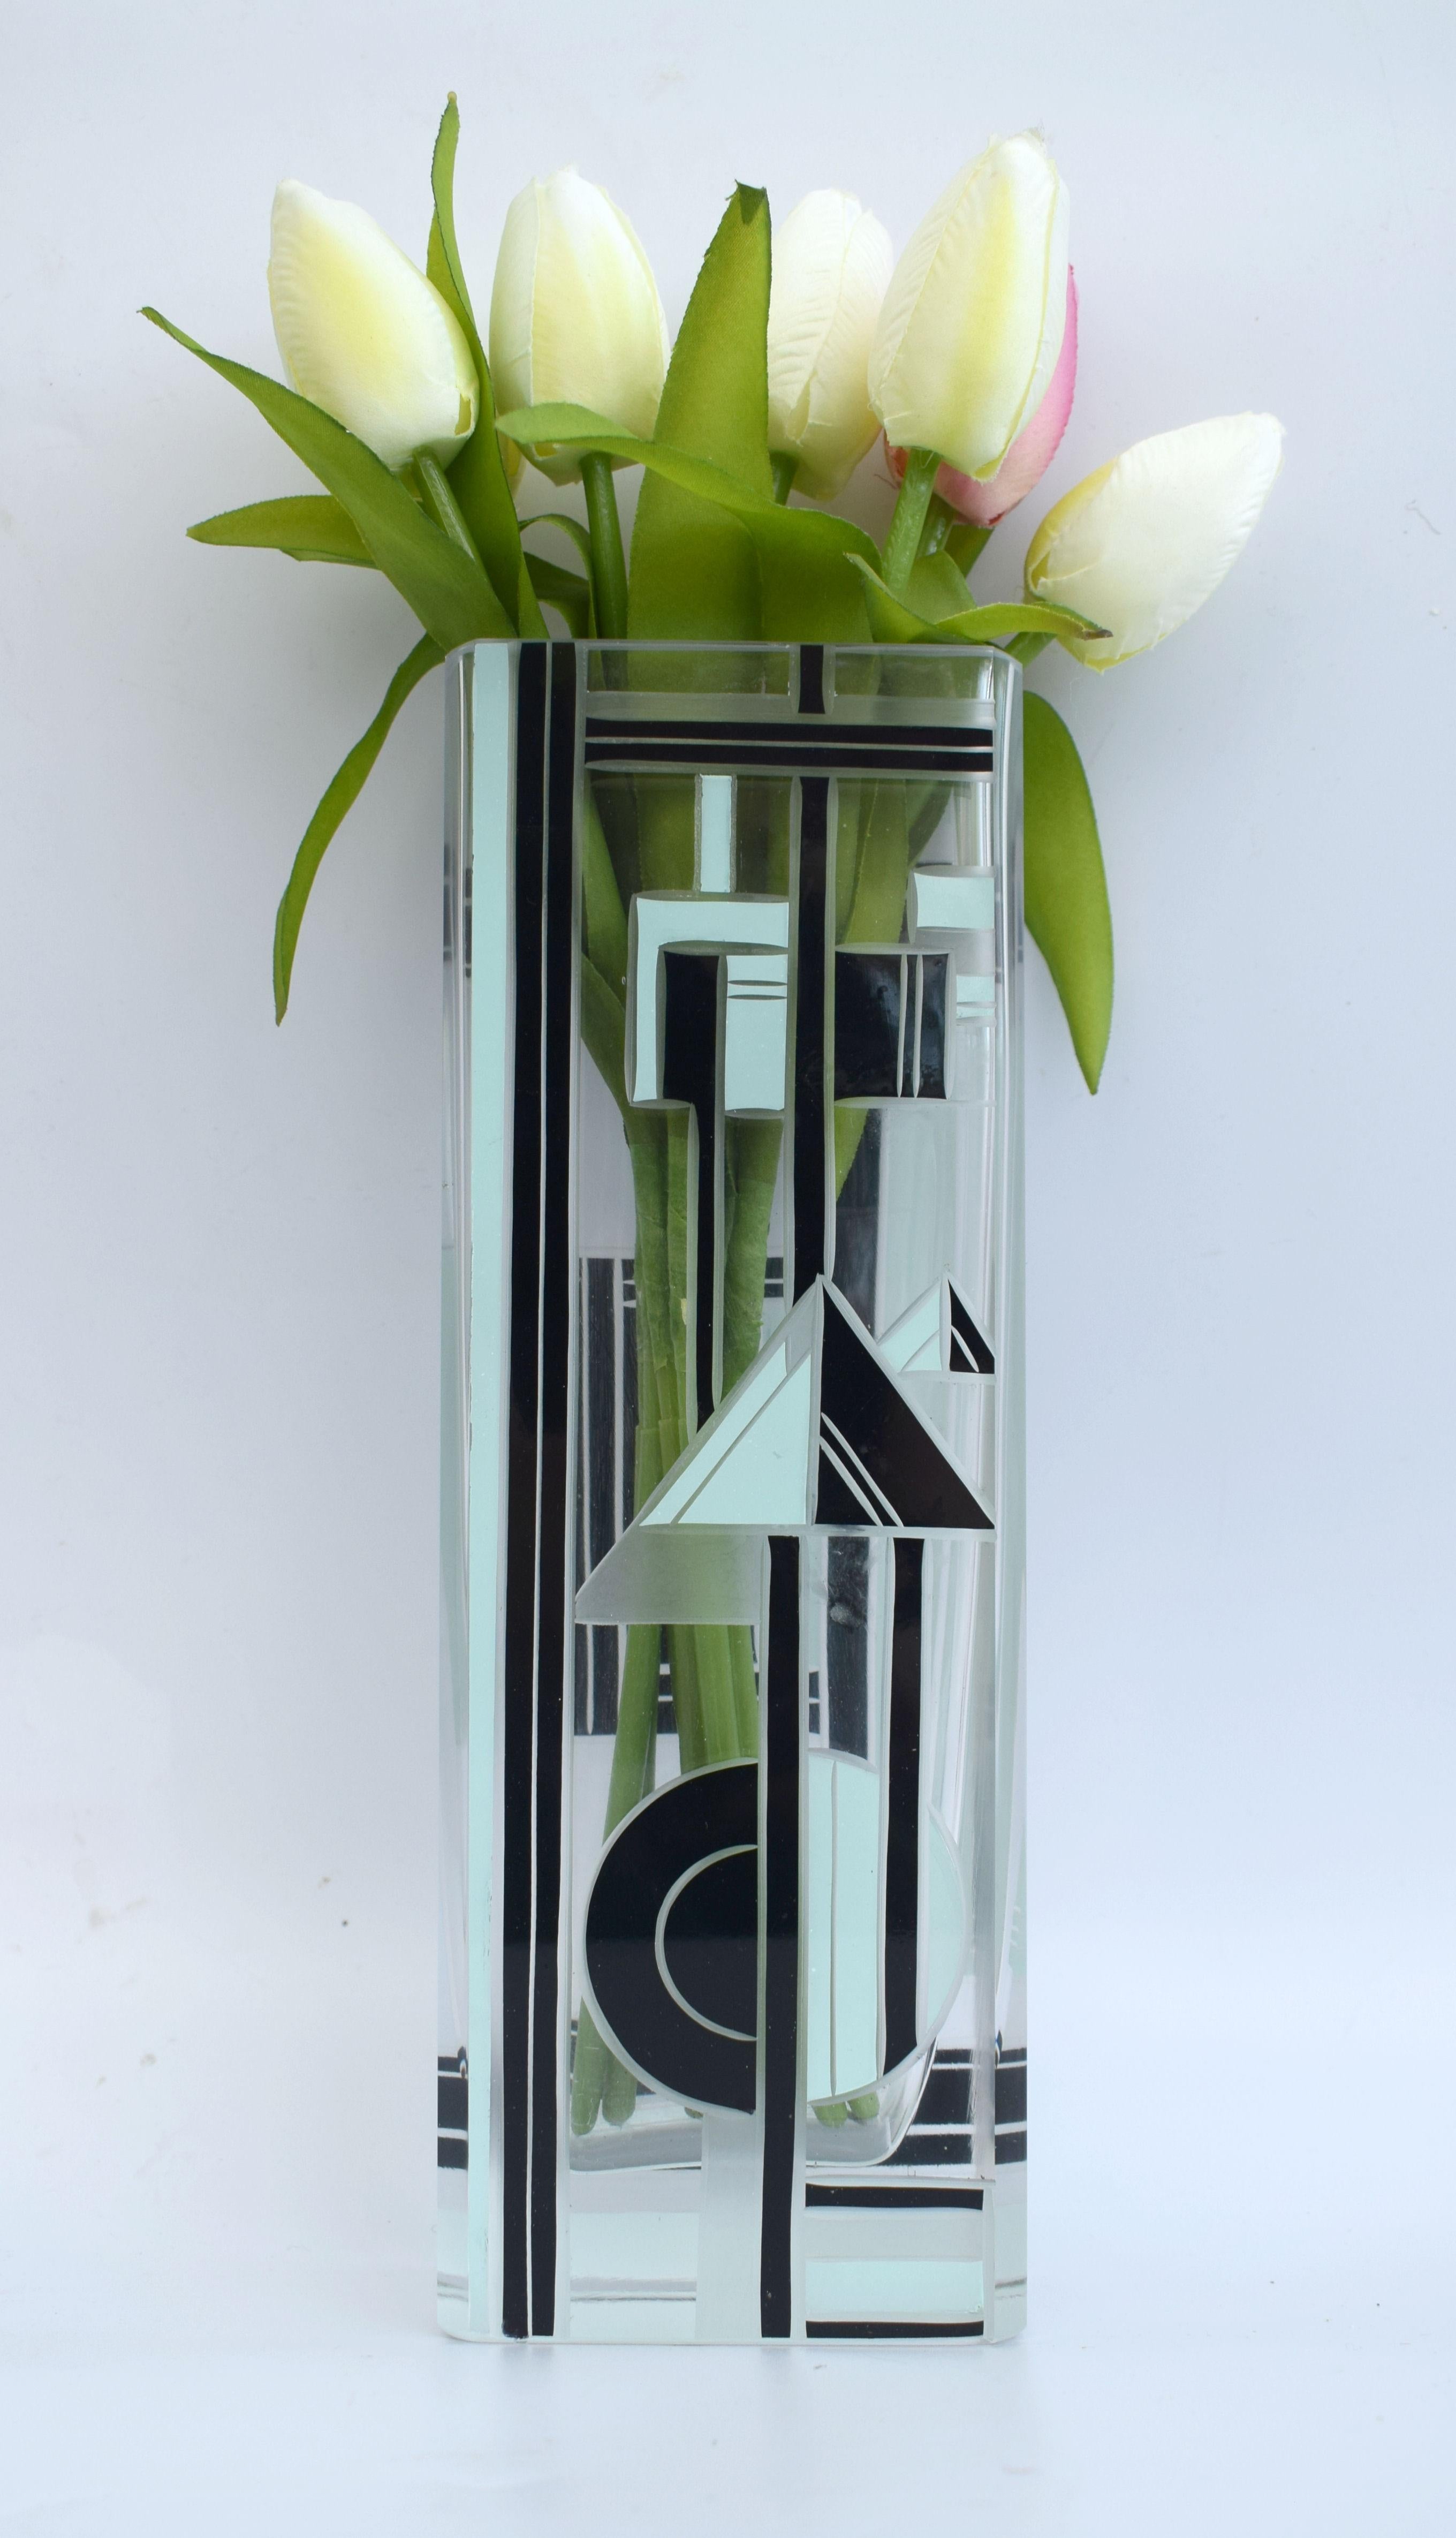 Whether you're looking to add to your own Art Deco collection or trying to source a piece for the friend ' who loves Art Deco' then look no further this superb vase, which can only be described as Art Deco on steroids, could be the very piece for